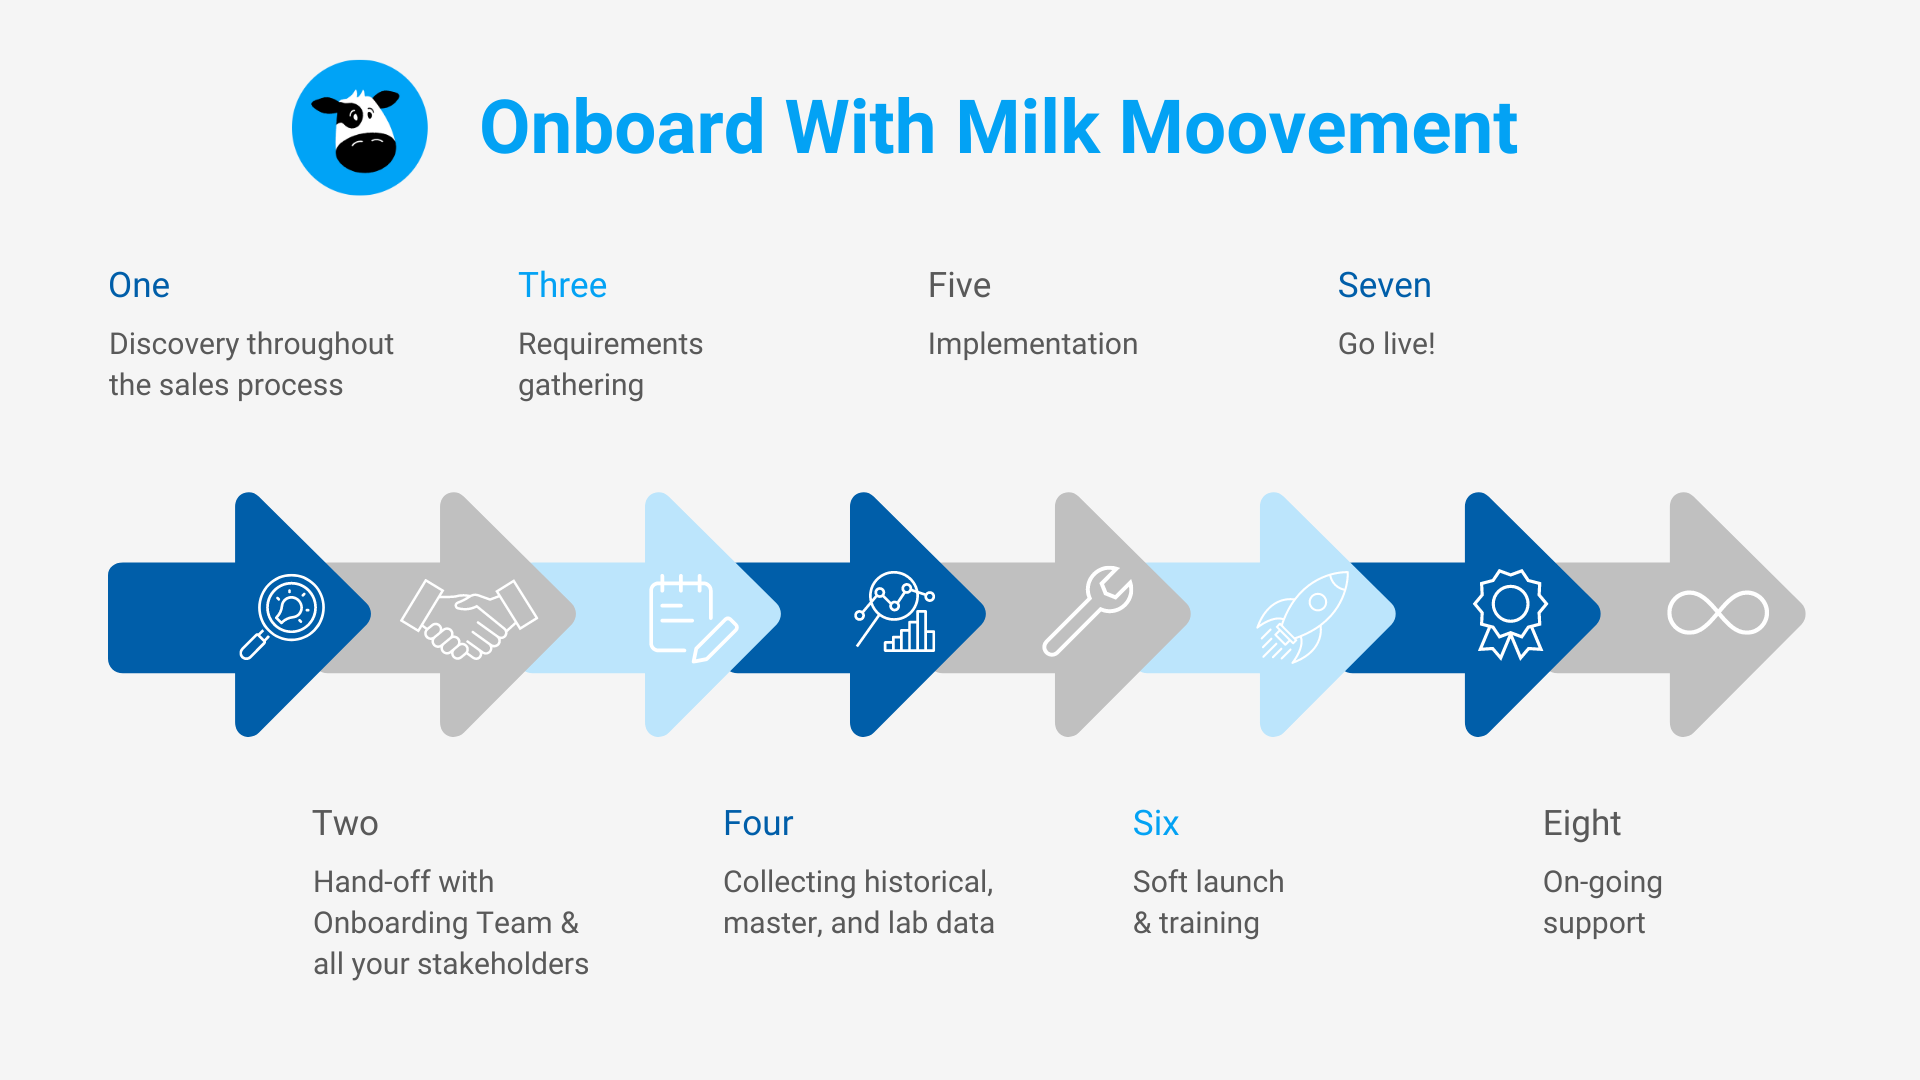 Eight steps to Onboard with Milk Moovement